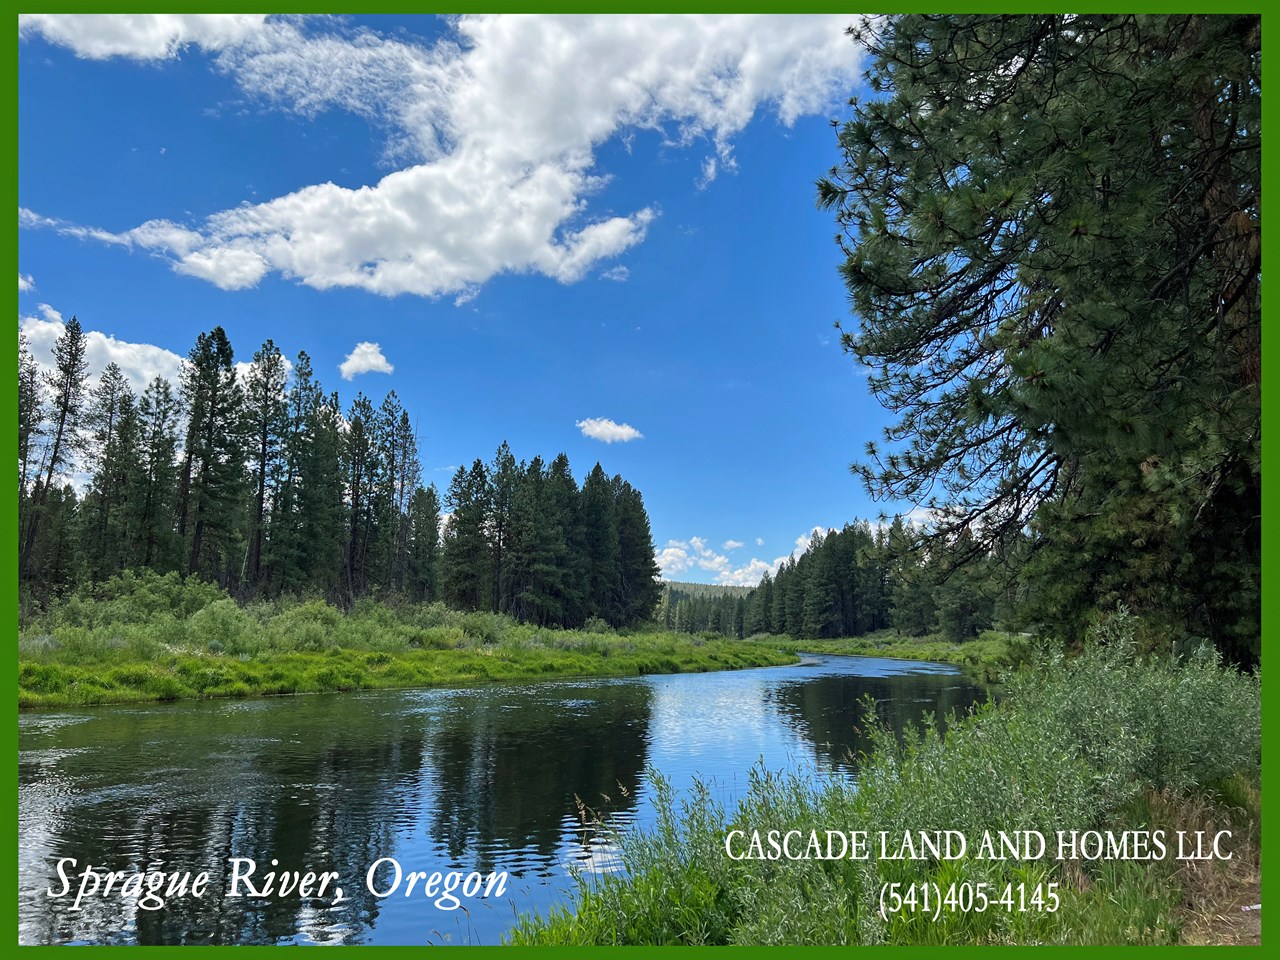 the sprague river is only about a five minute walk from the property!